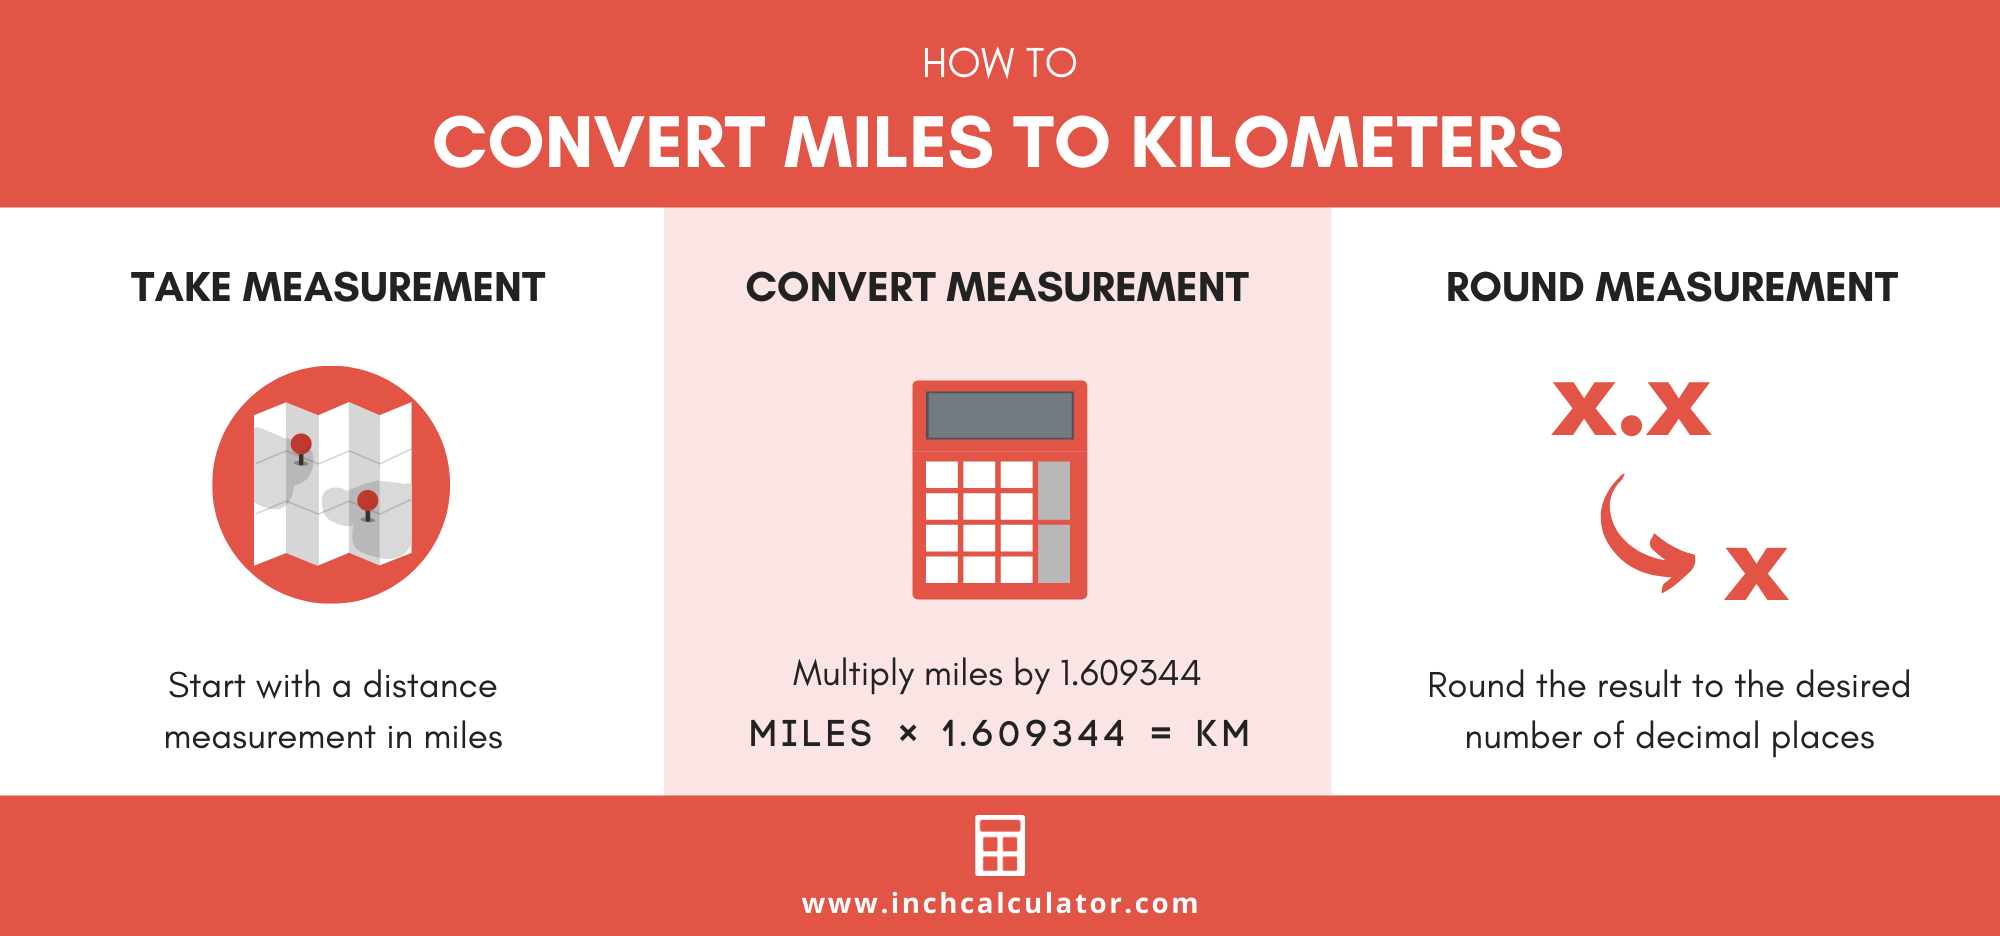 Miles And Km Chart